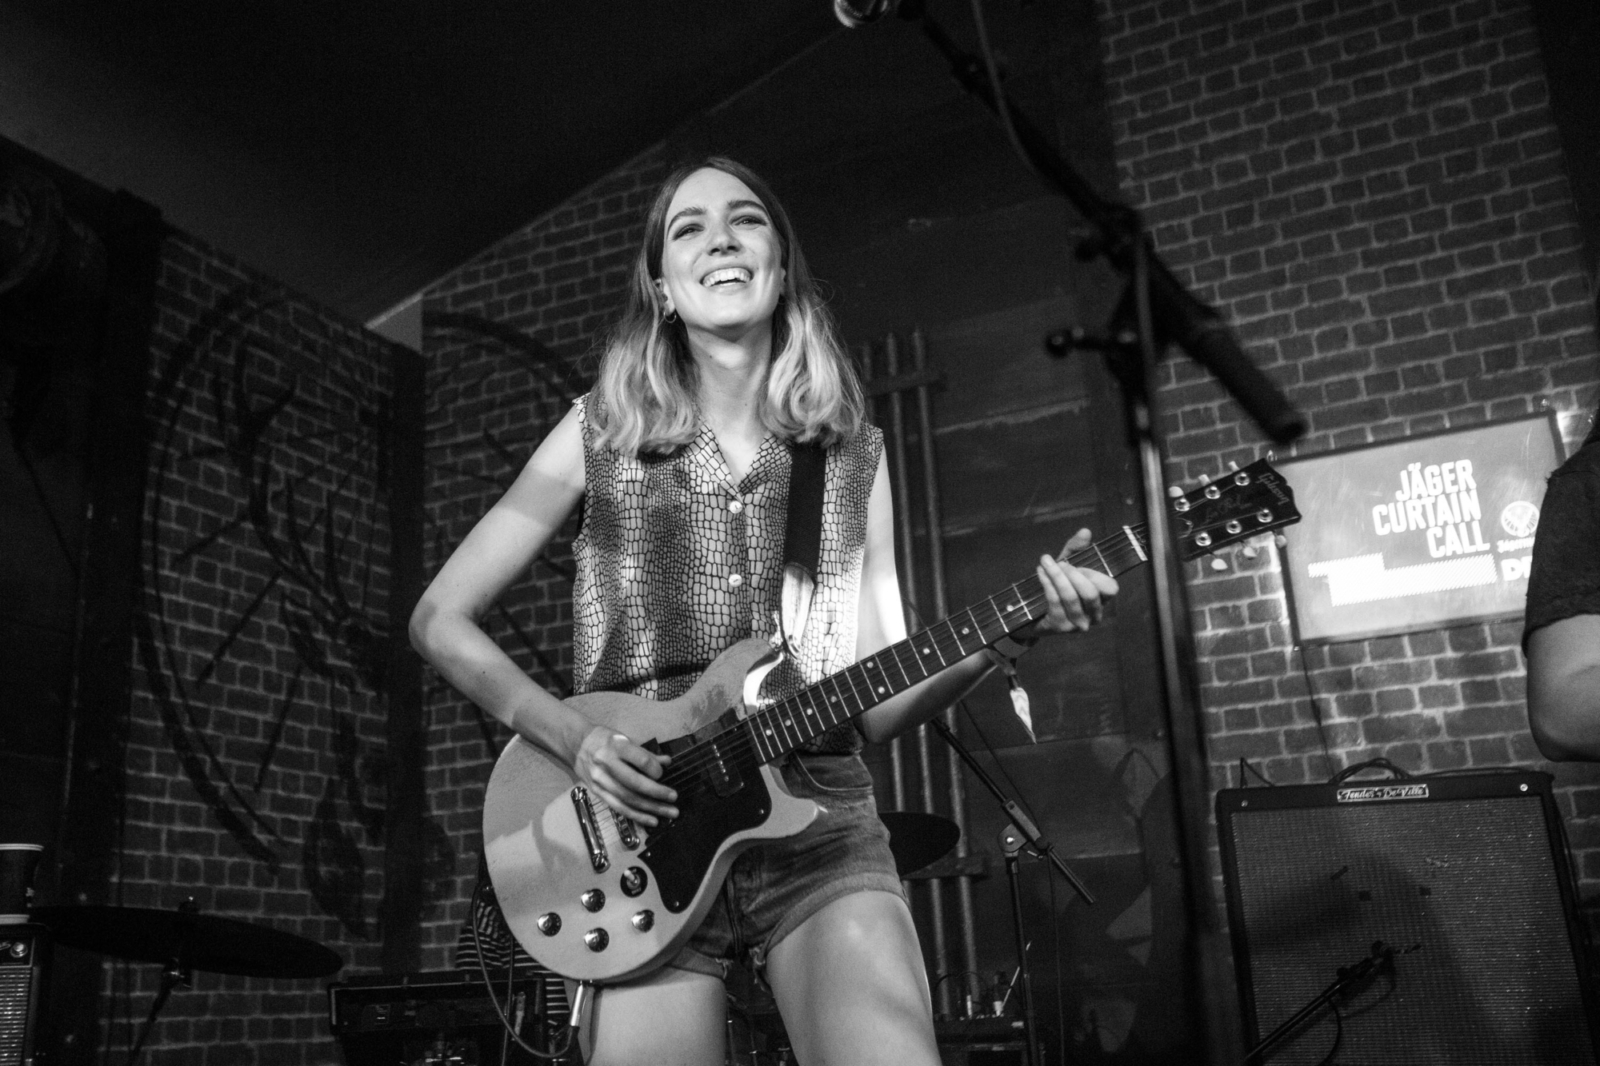 The Big Moon, Superfood, Yowl and more bring the noise for Jager Curtain Call at All Points East